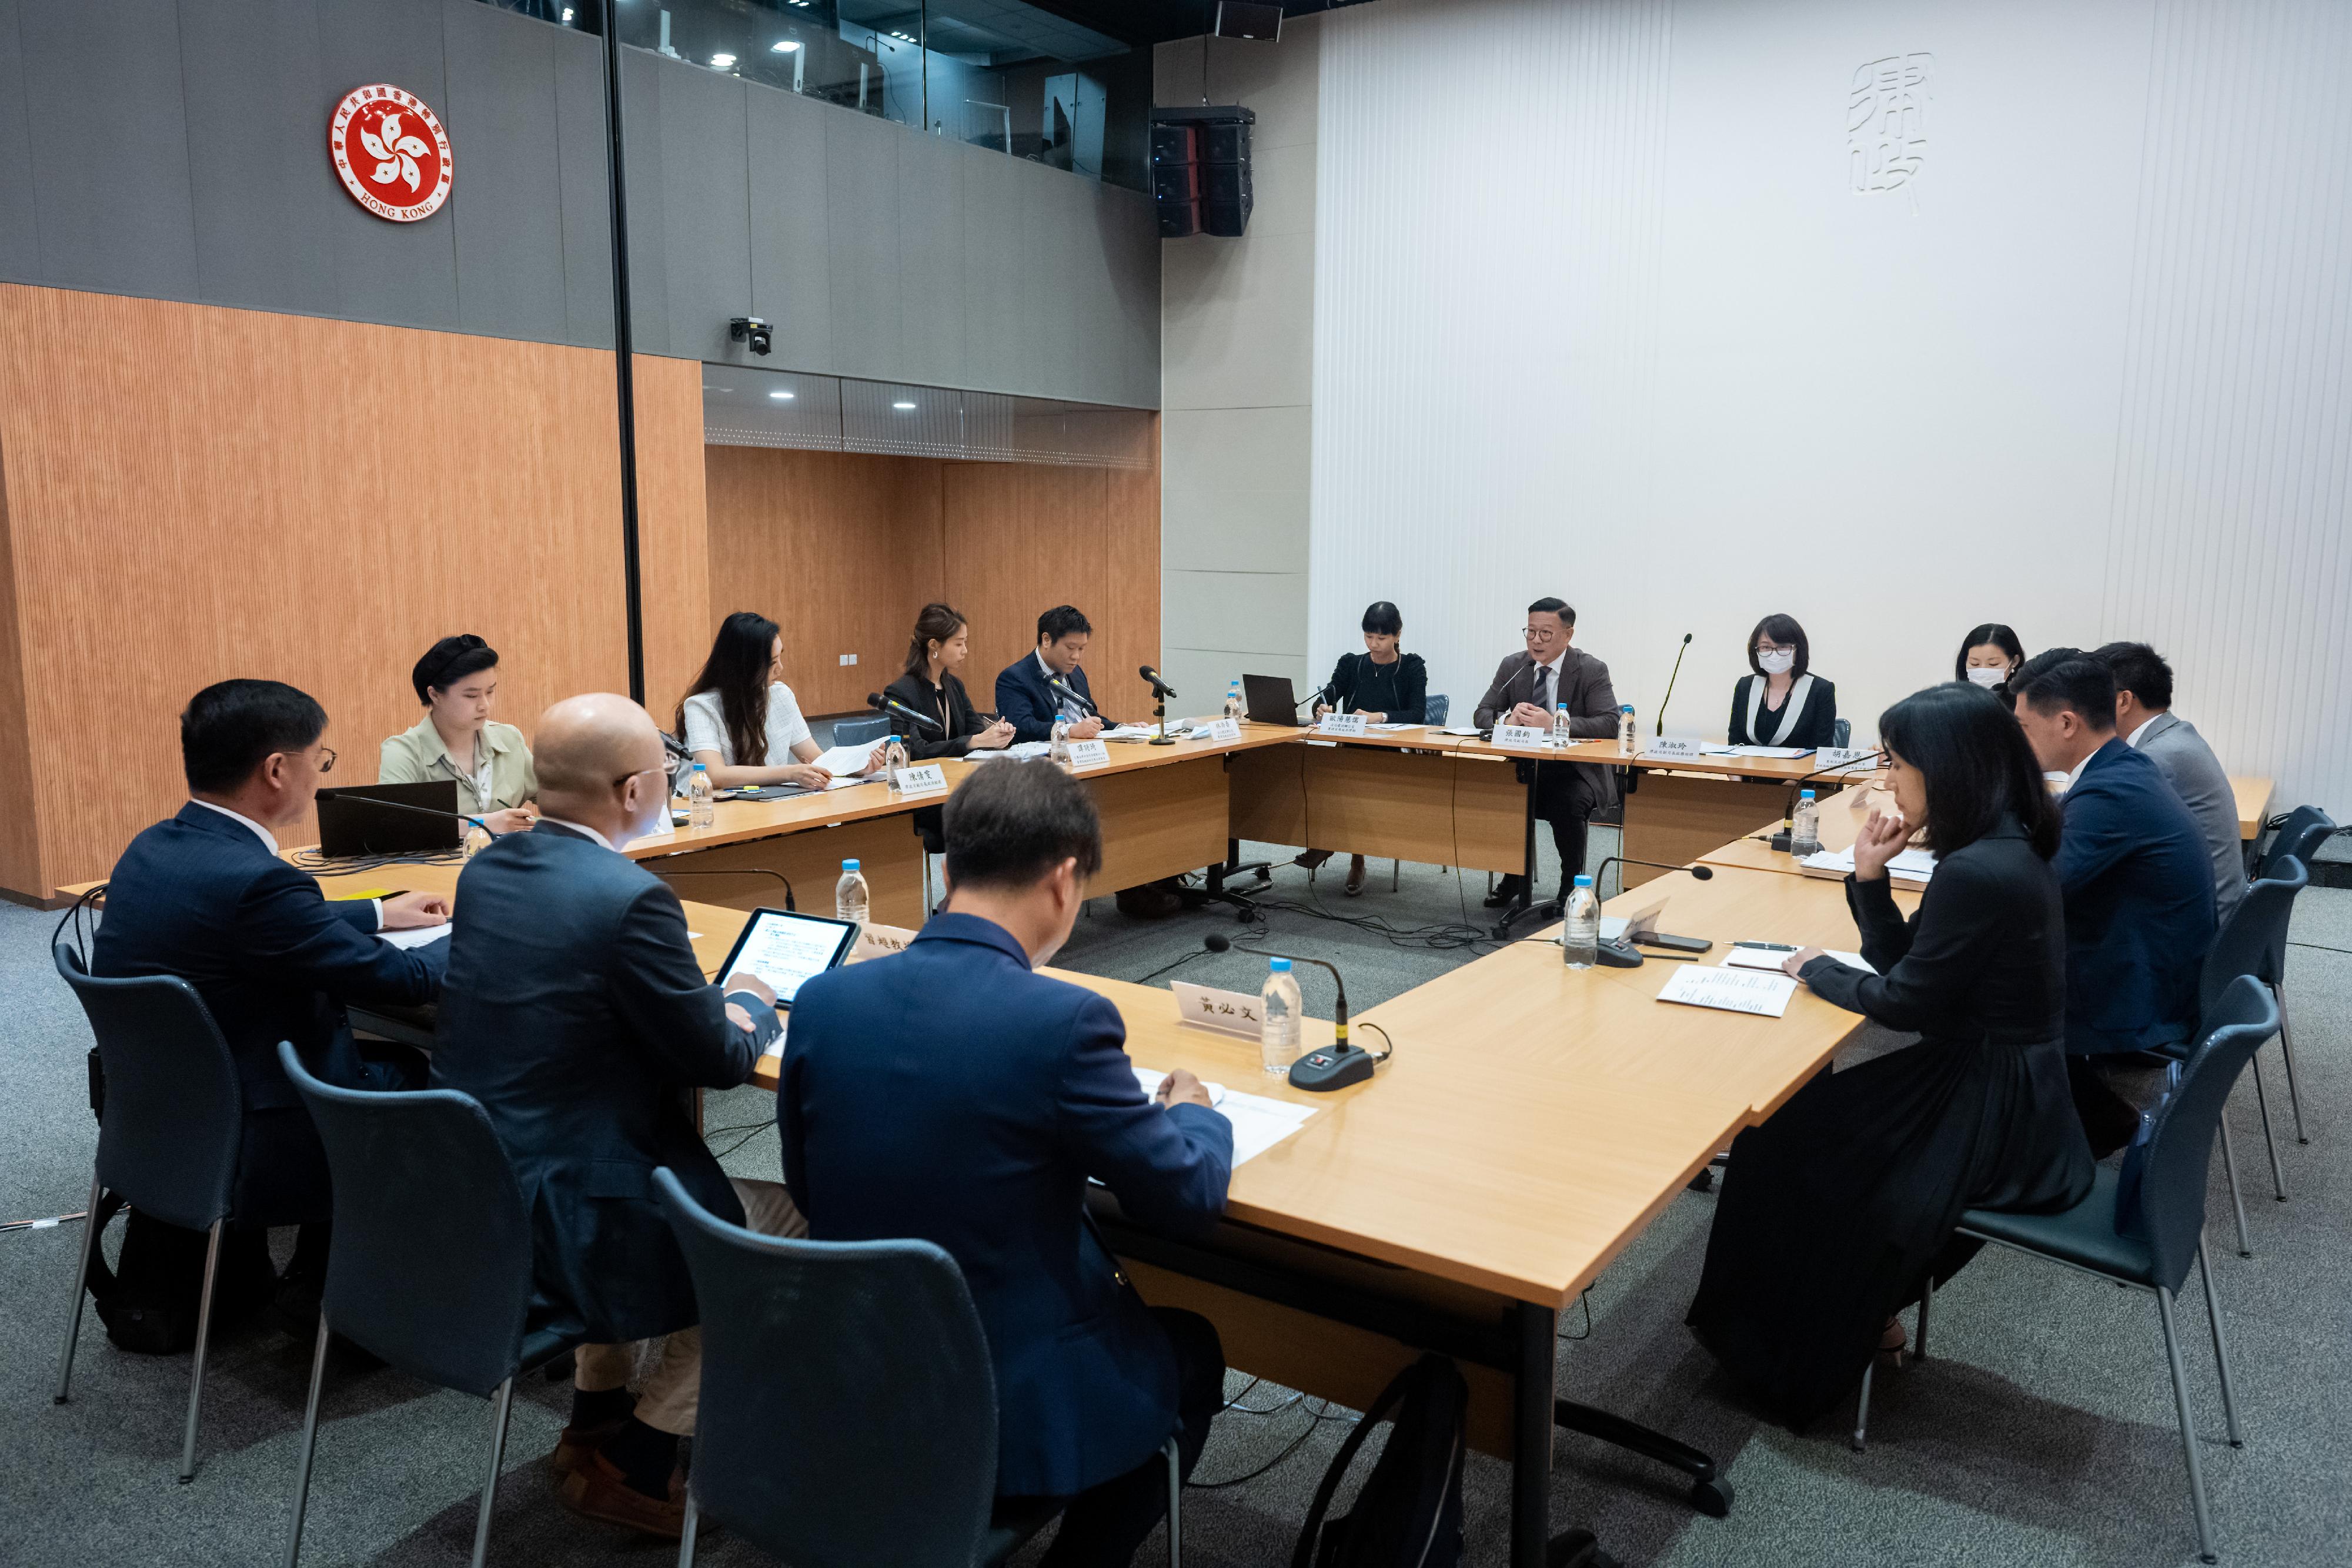 Chaired by the Deputy Secretary for Justice, Mr Cheung Kwok-kwan (back row, third right), the Department of Justice's Guangdong-Hong Kong-Macao Greater Bay Area Task Force held its second meeting today (June 23).

